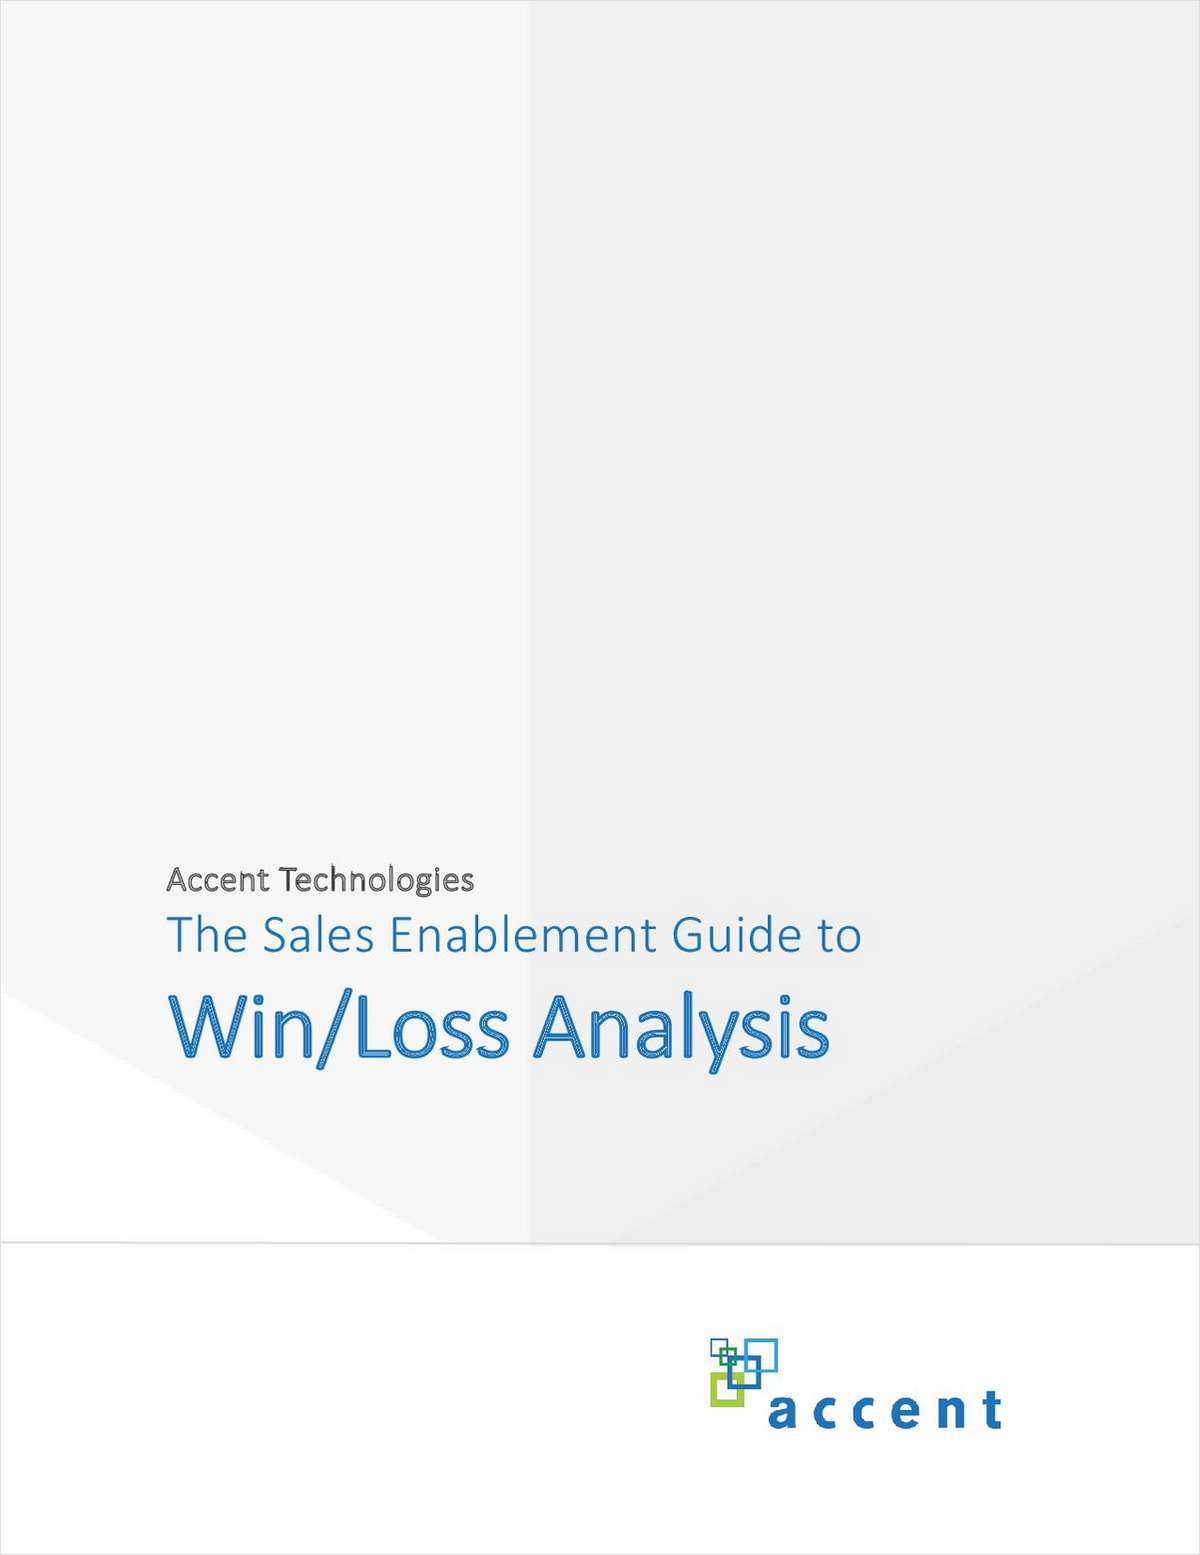 The Sales Enablement Guide to Win/Loss Analysis